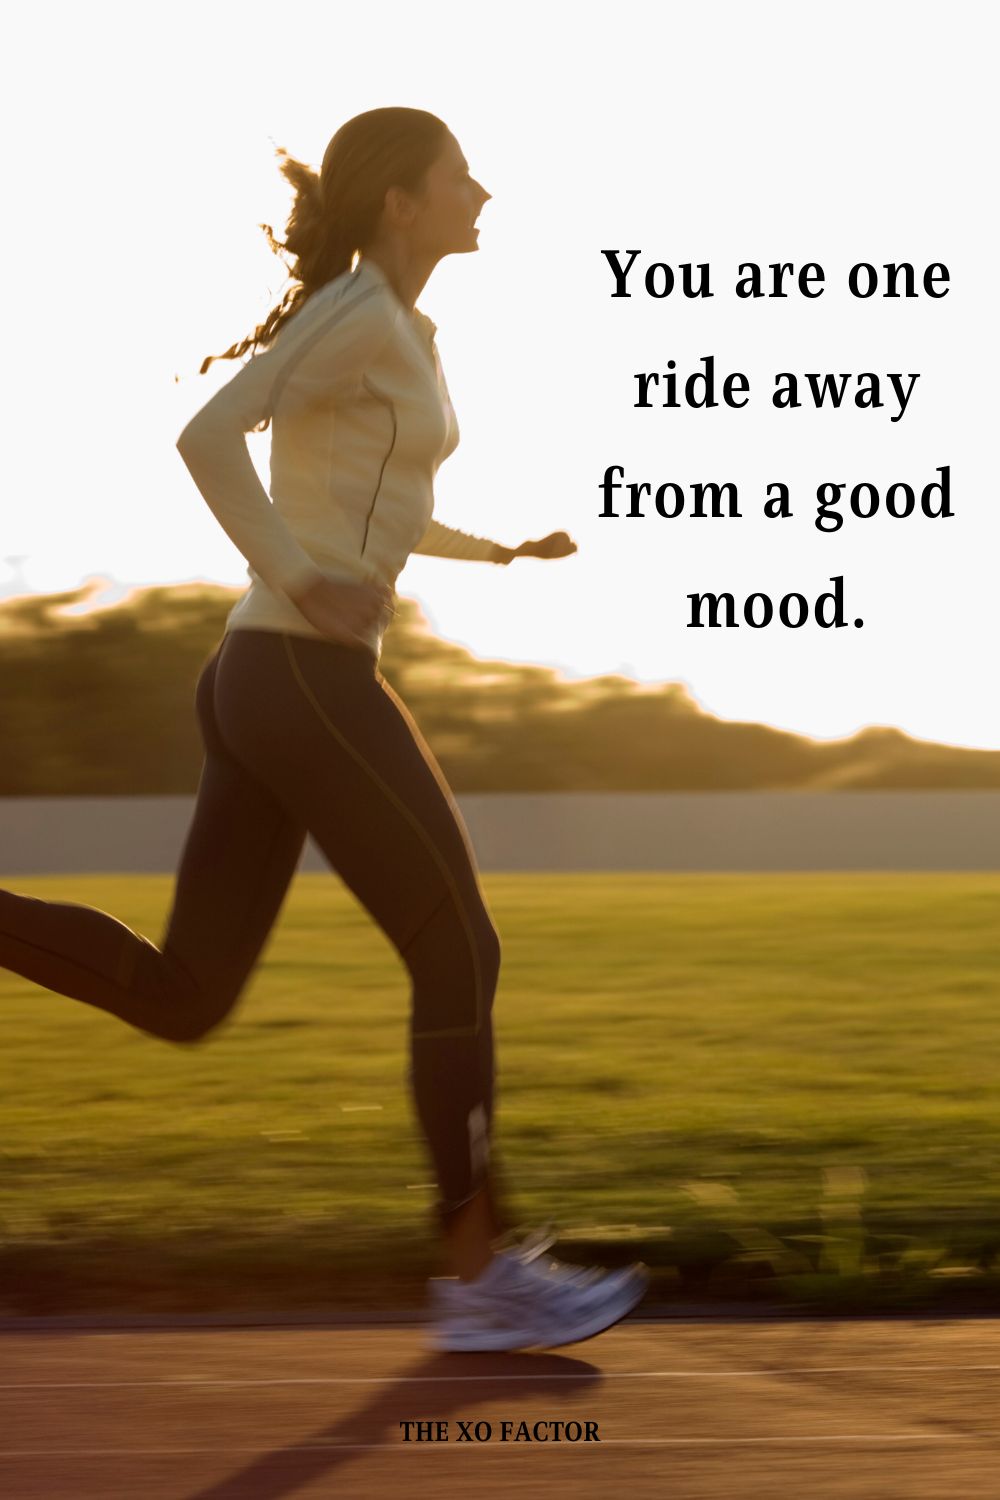 You are one ride away from a good mood.